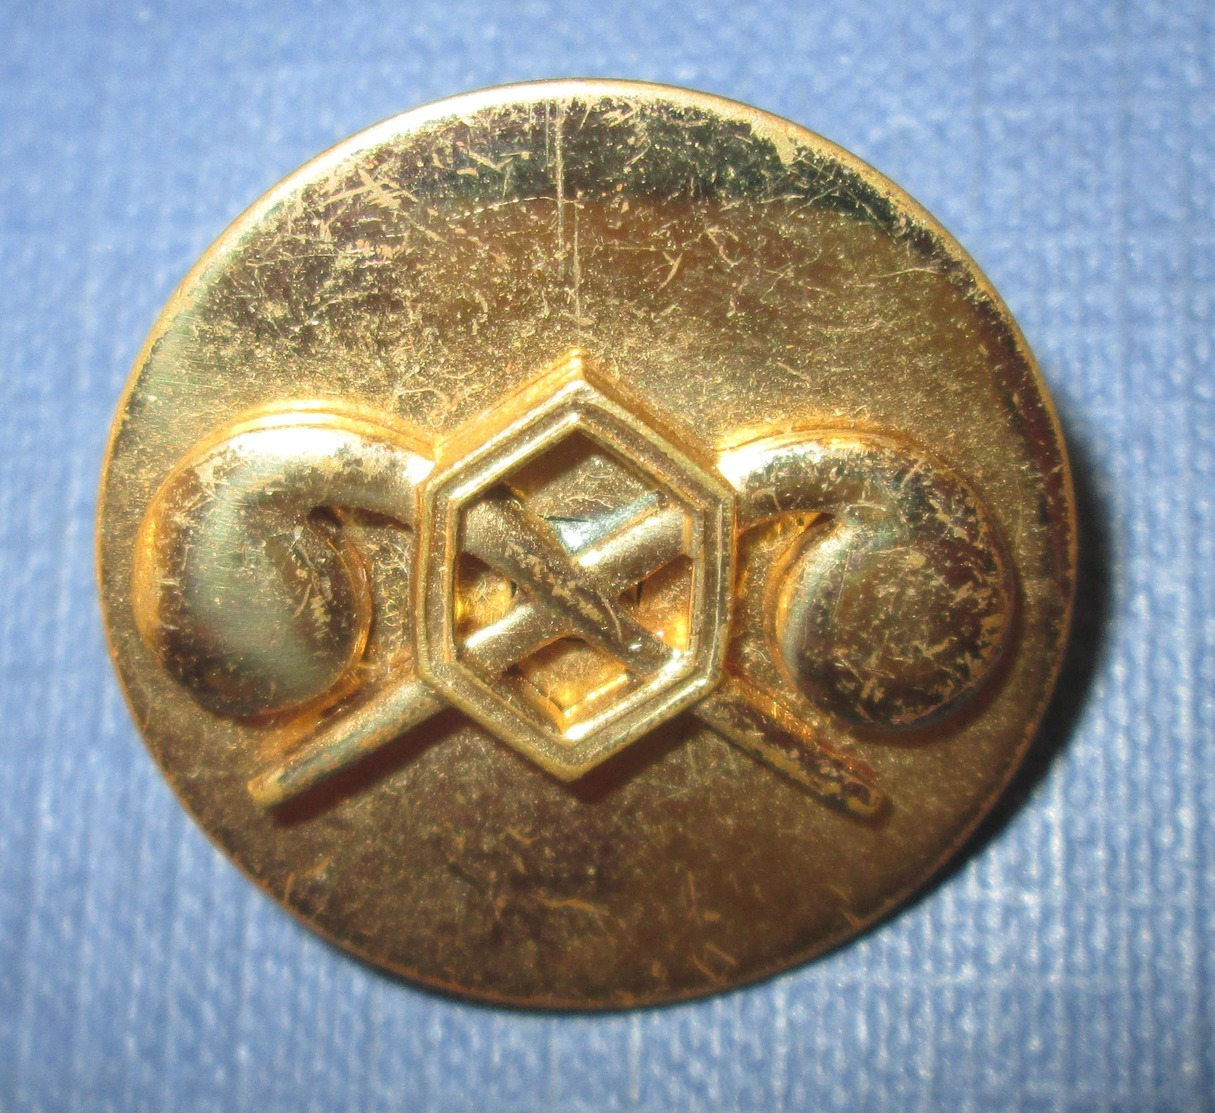 Collar "Chemical Department" US WW2 - 1939-45